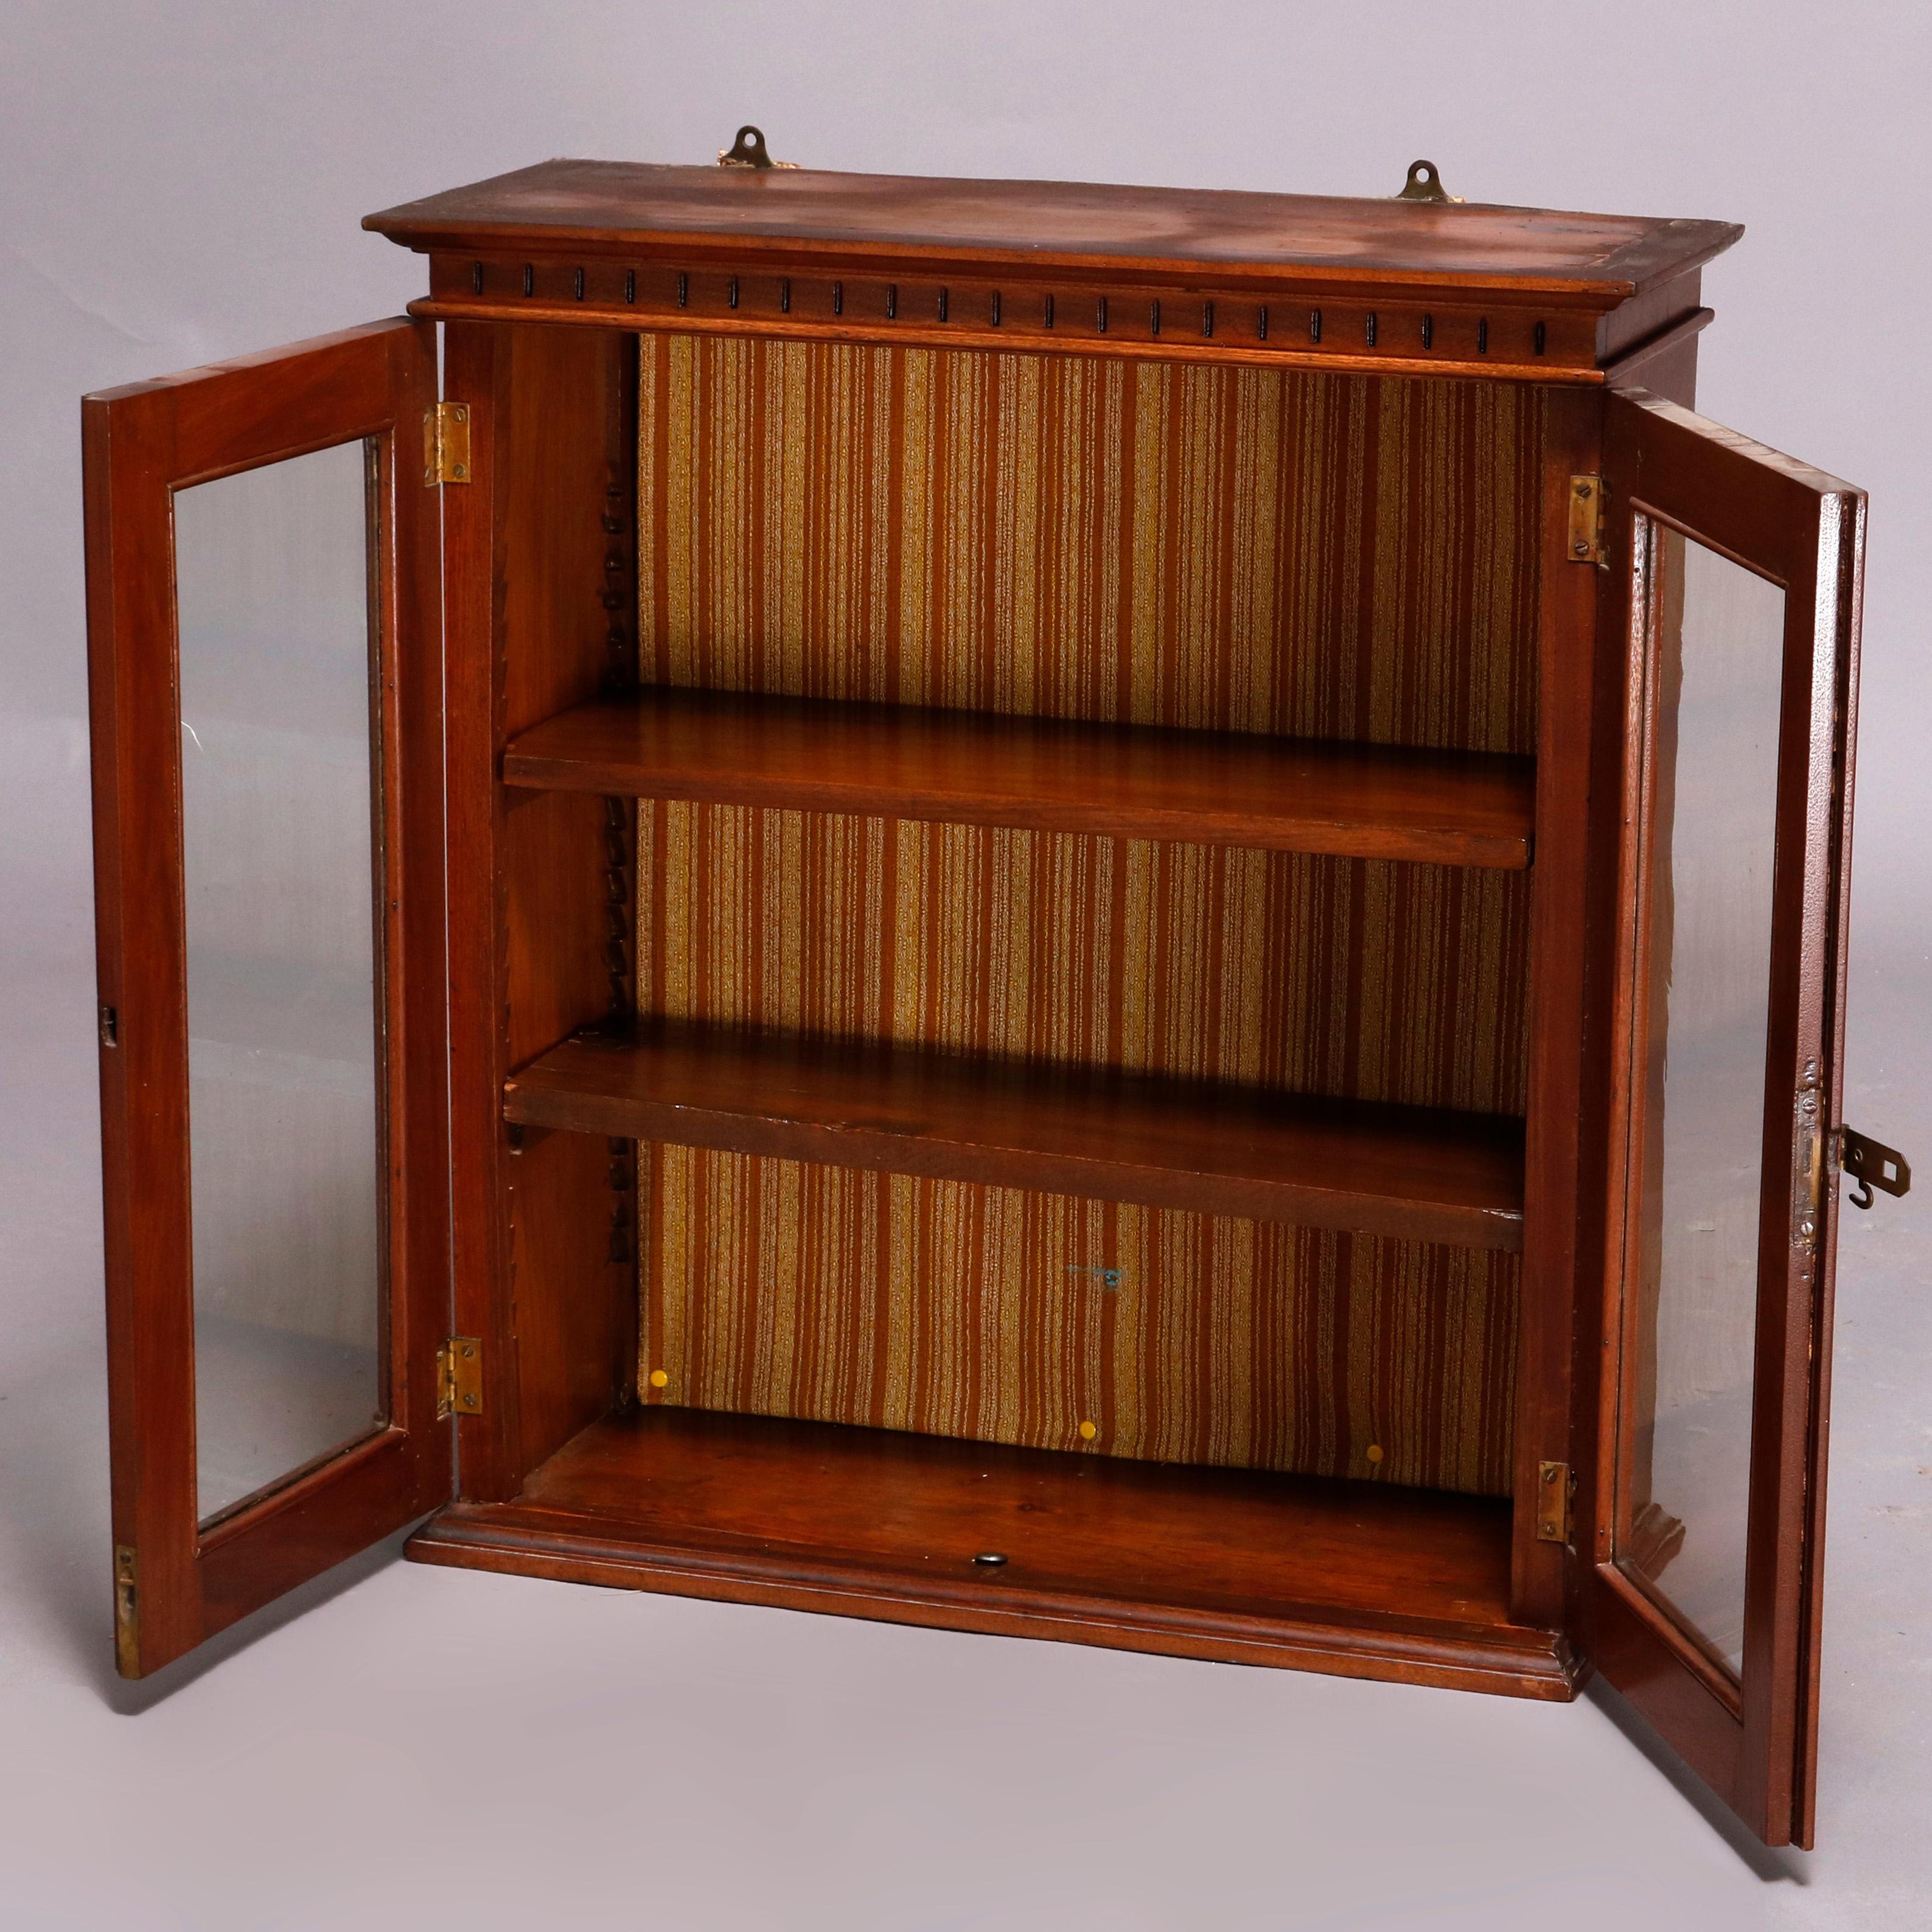 An antique Victorian Eastlake hanging cabinet offers walnut construction with incised decoration and having two glass doors opening to shelved interior, 19th century

***DELIVERY NOTICE – Due to COVID-19 we have employed LIMITED-TO-NO-CONTACT